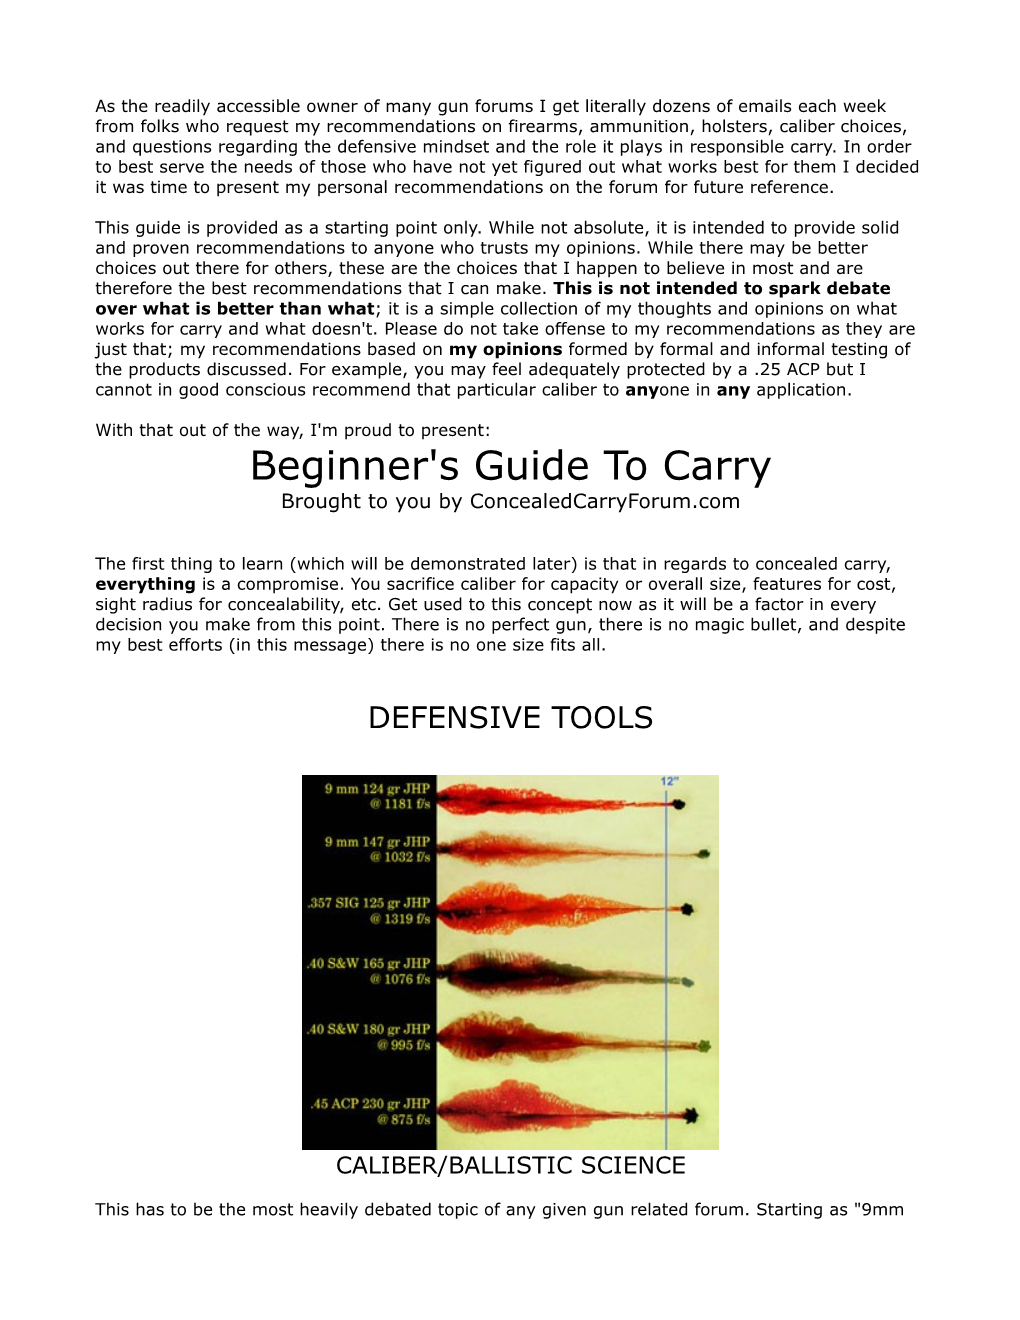 Beginner's Guide to Carry Brought to You by Concealedcarryforum.Com